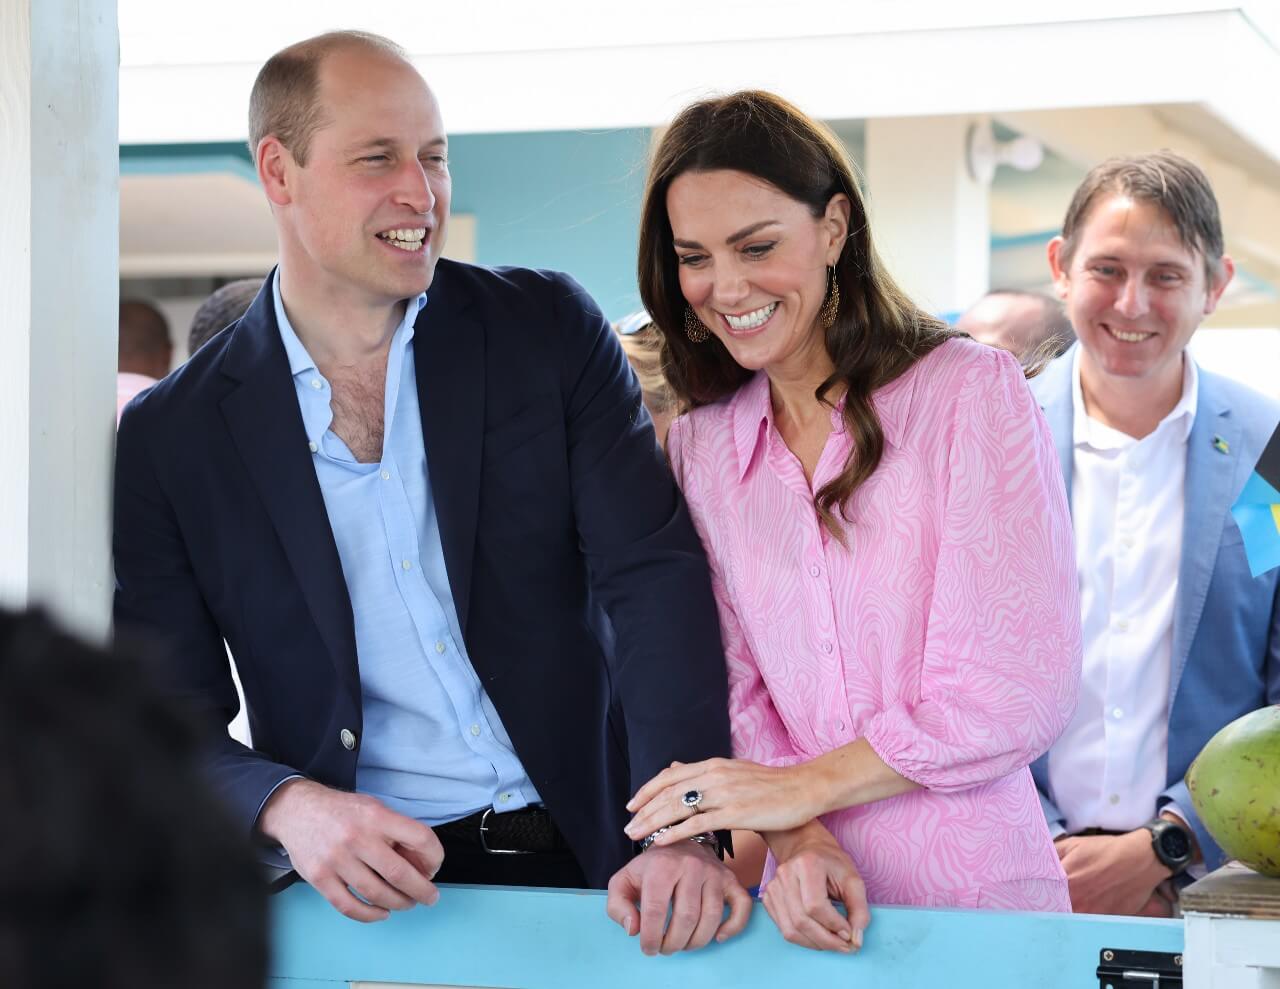 Prince William and Kate Middleton attend an event together.